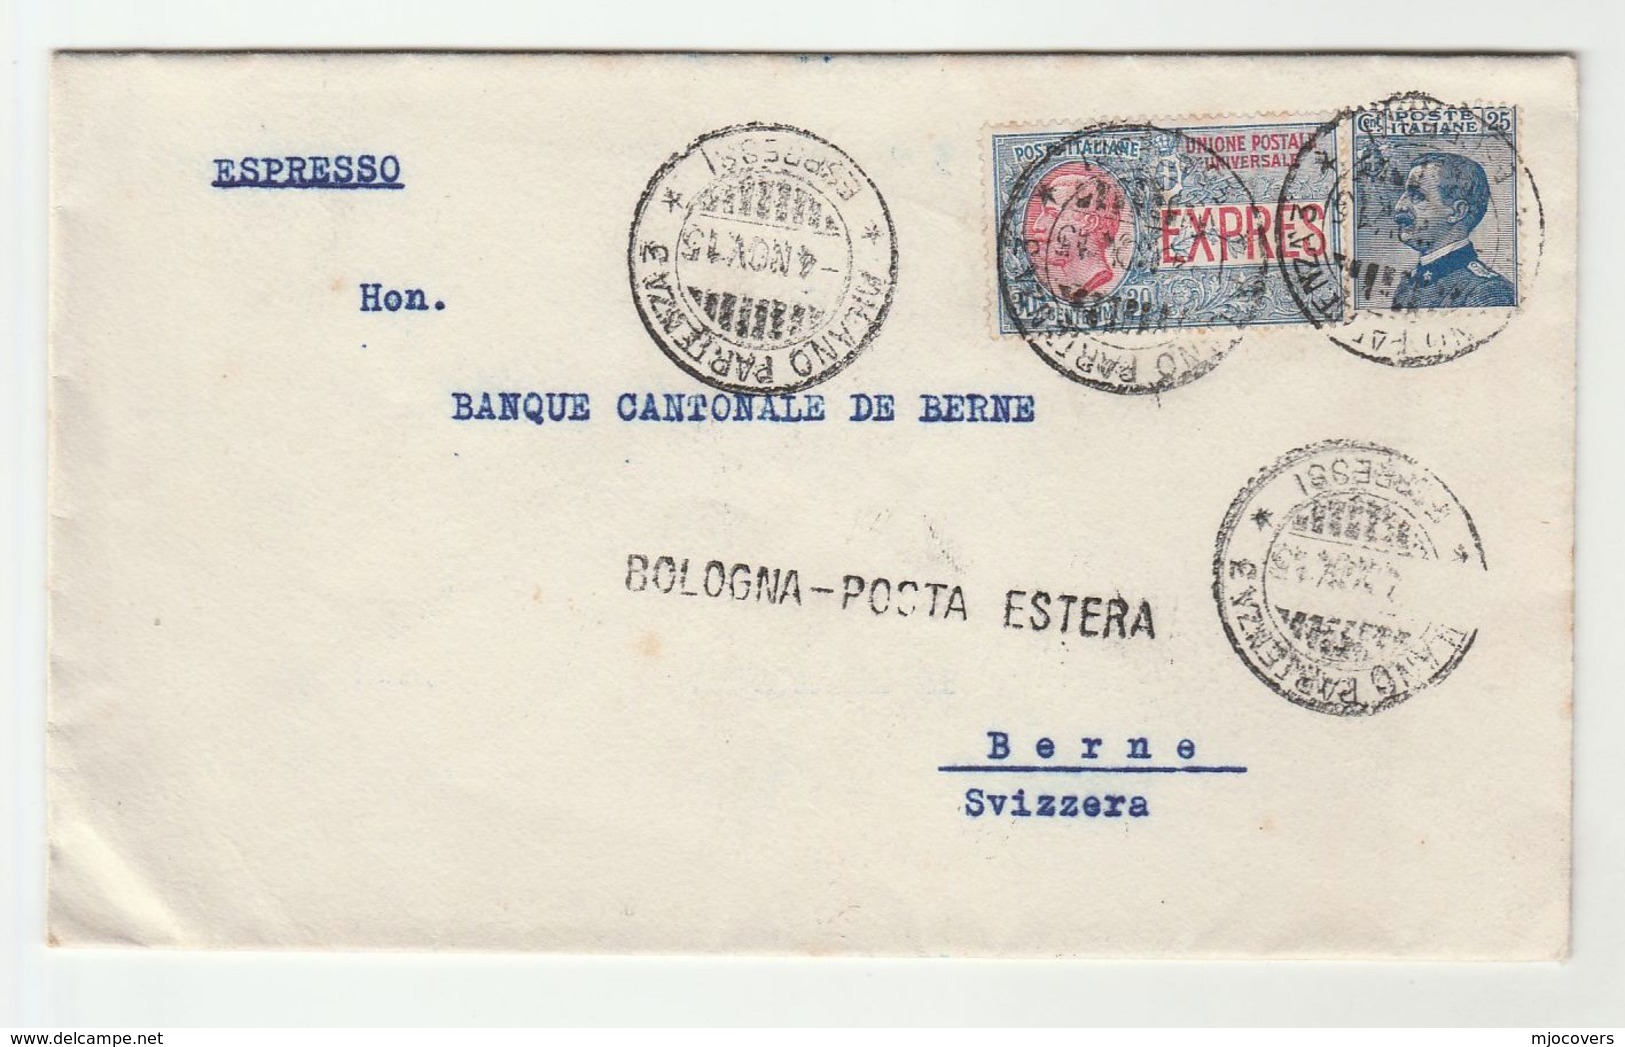 1915 EXPRESS Stamp COVER 'BOLOGNA POSTA ESTERA' Post Marking MILAN Italy To BERNE Switzerland - Marcophilia